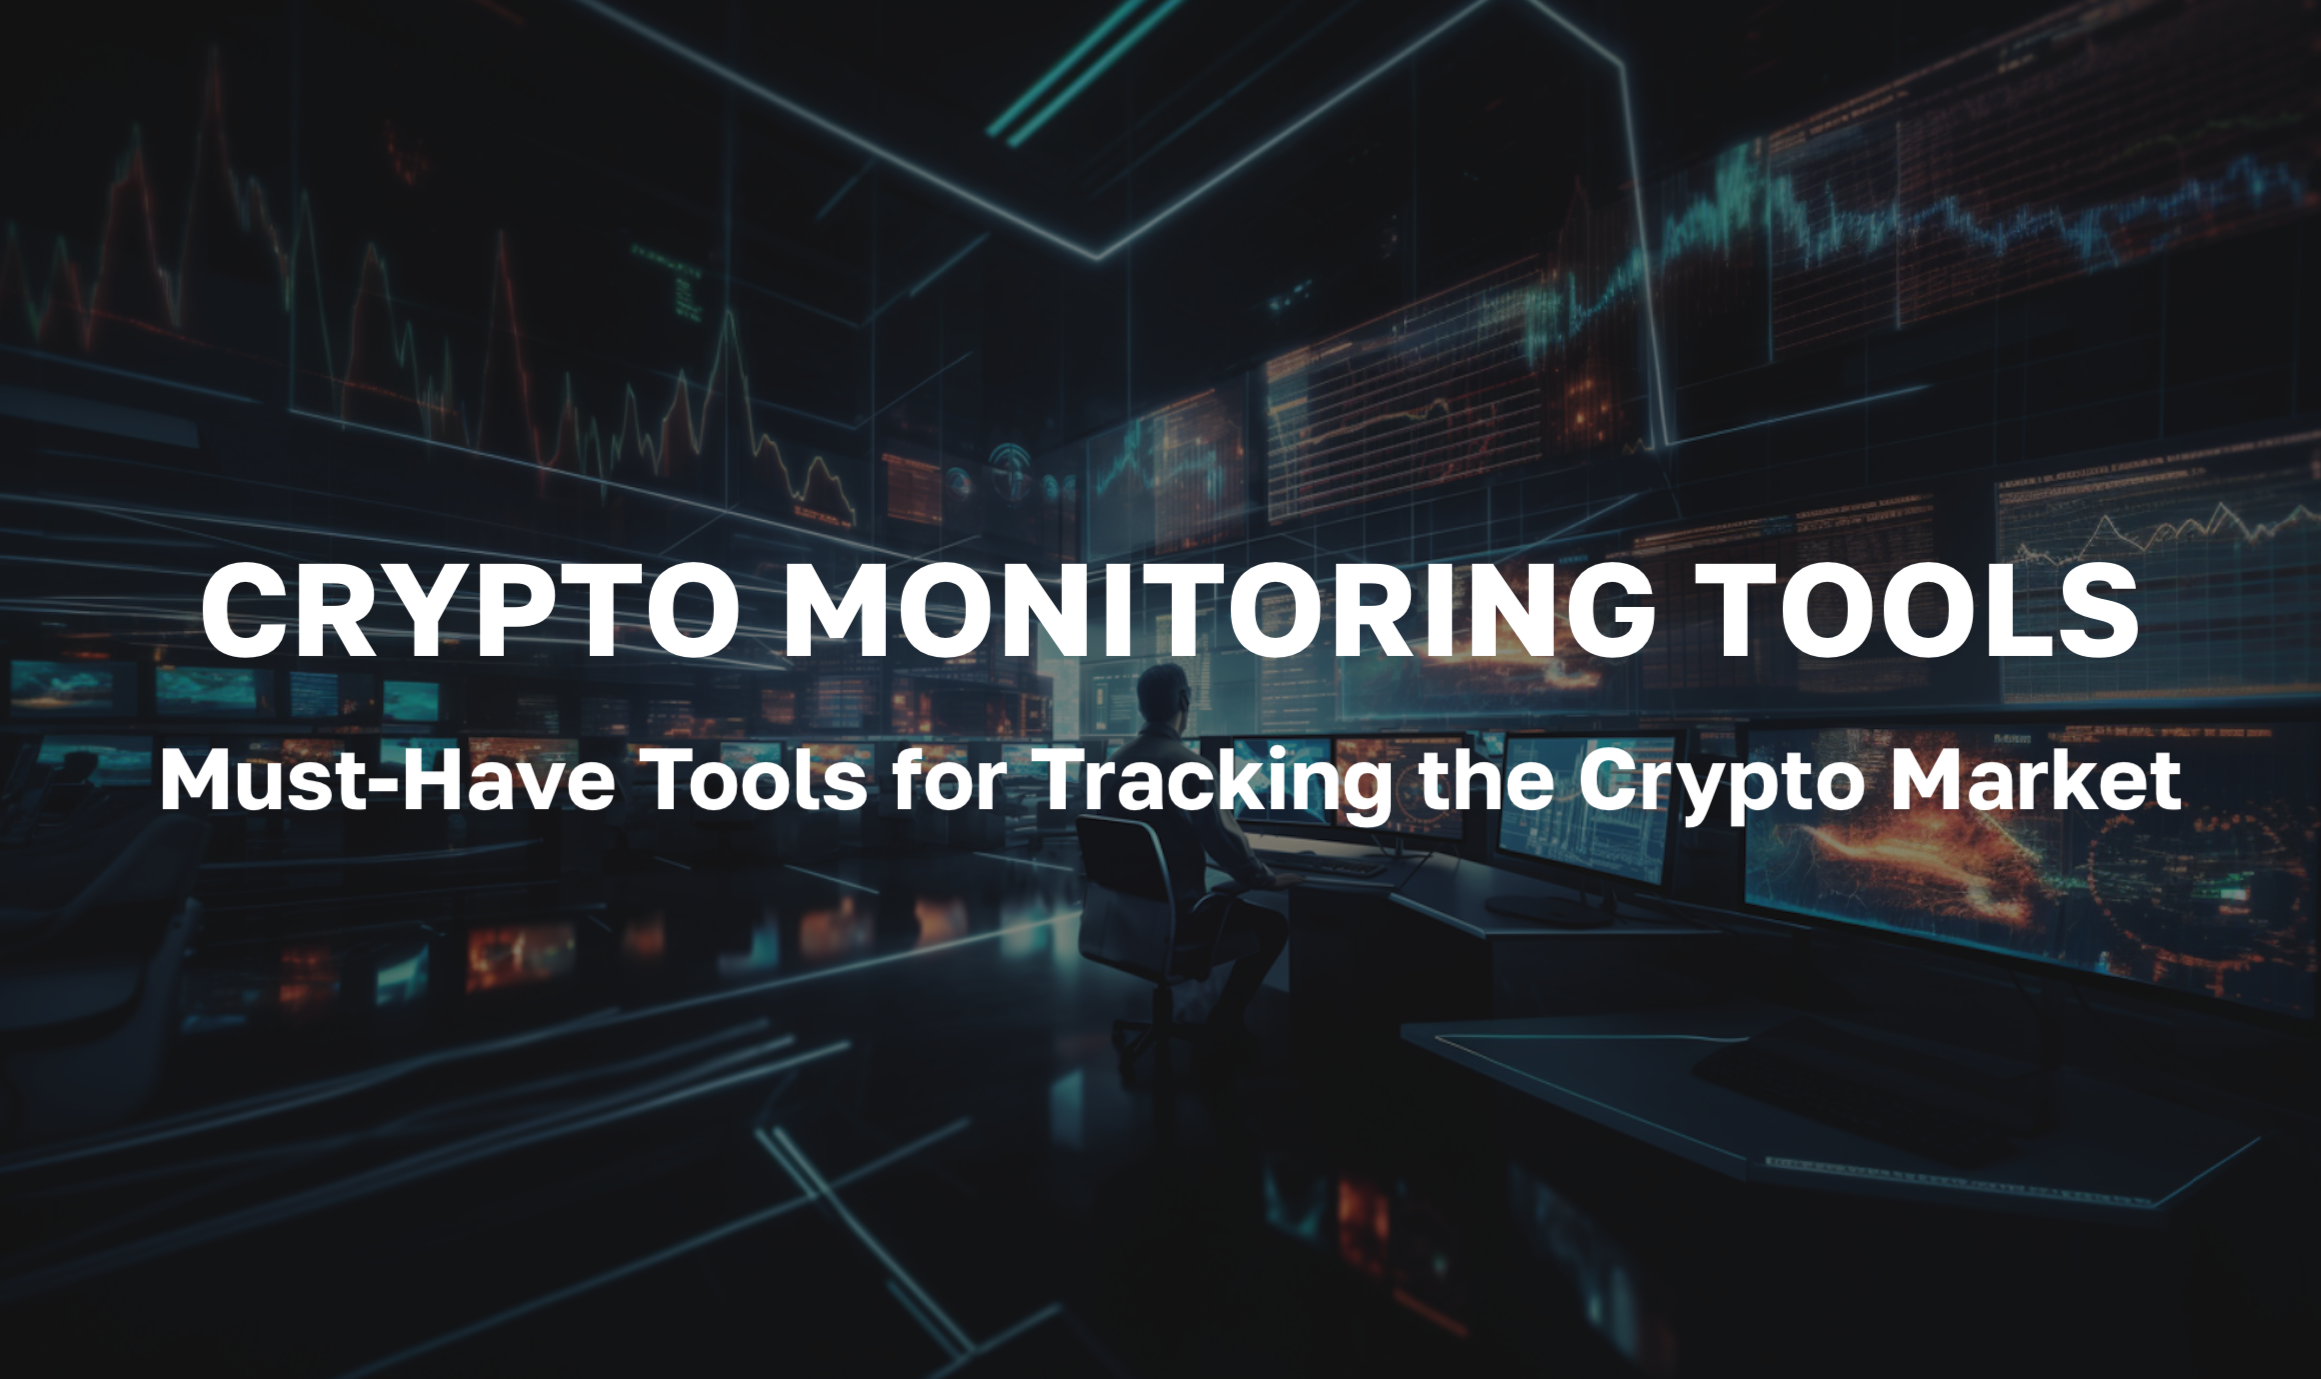 Must-Have Crypto Monitoring Tools for Tracking the Crypto Market